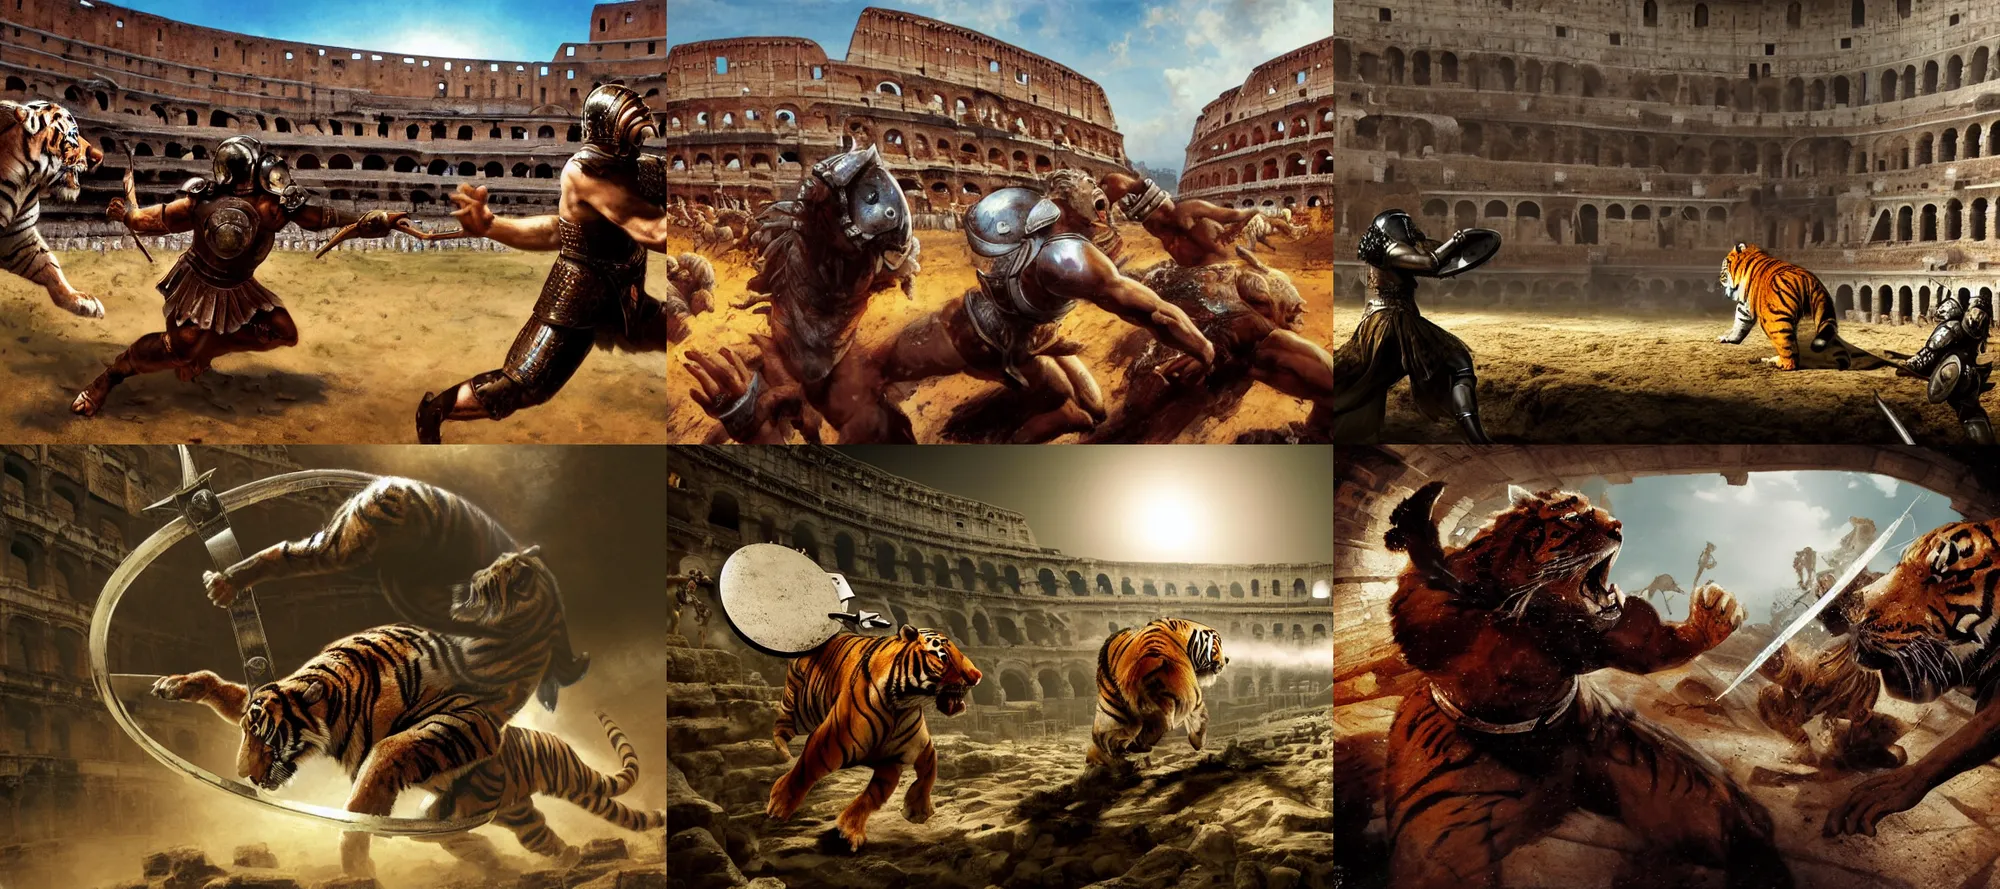 Prompt: incredible screenshot, huge Siberian tiger attacking a roman gladiator holding a reflective silver circle shield defensive fighting in a sandy arena in the Colosseum, dynamic camera angle, deep 3 point perspective, fish eye, dynamic scene, by phil hale, ashley wood, geoff darrow, james jean, craig mullins, Jean-Leon Gerome, 8k, hd, high resolution print